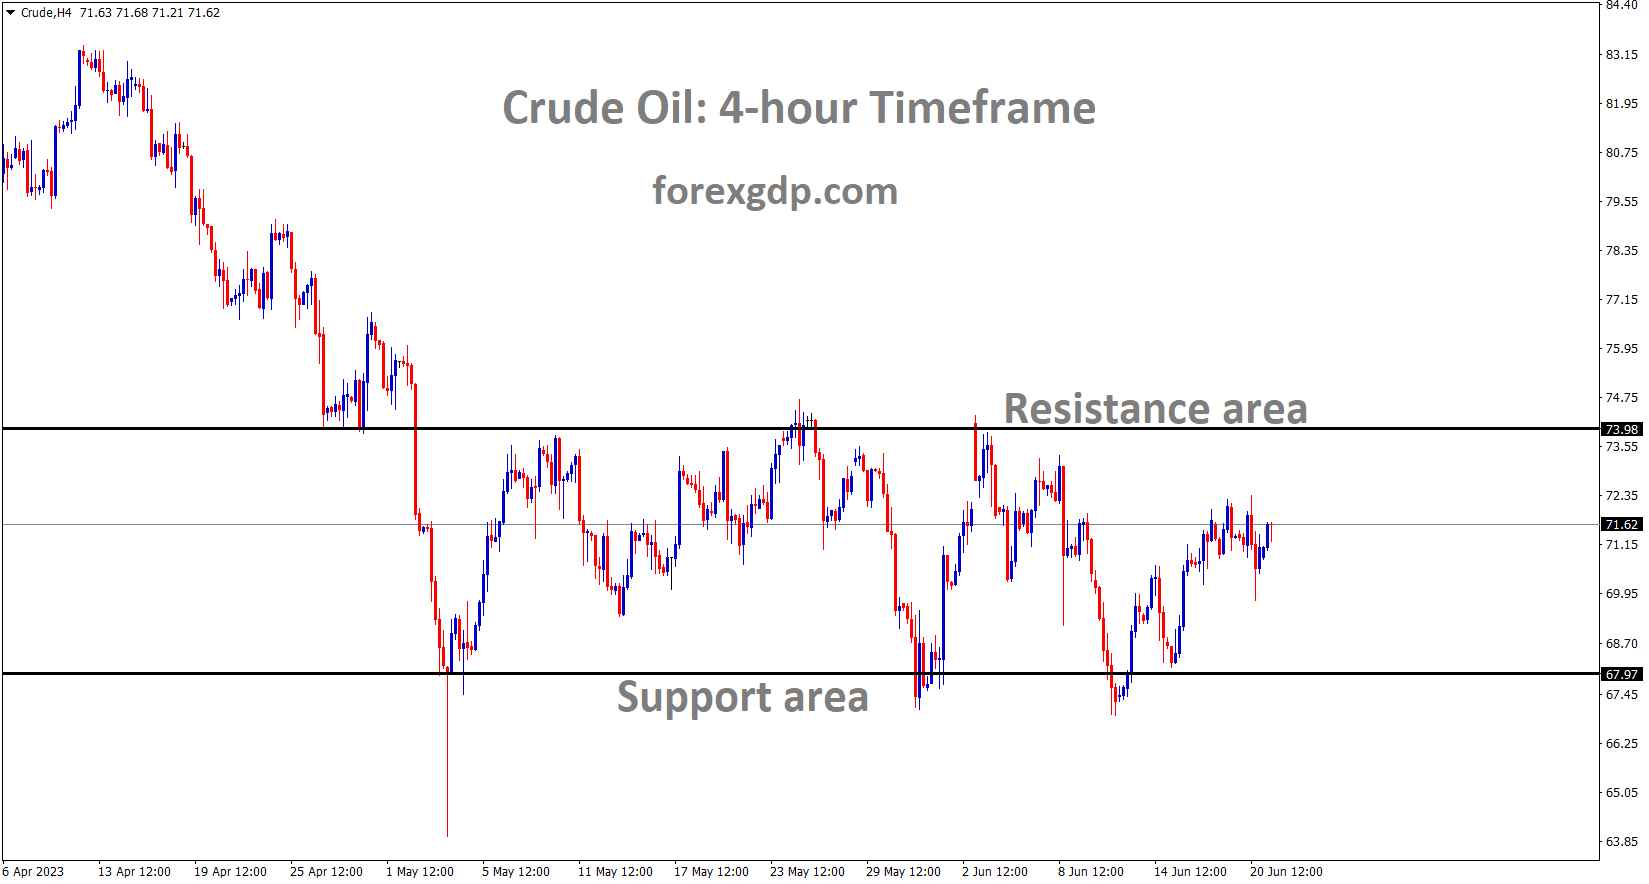 Crude Oil Price is moving in the Box pattern and the market has rebounded from the horizontal support area of the pattern